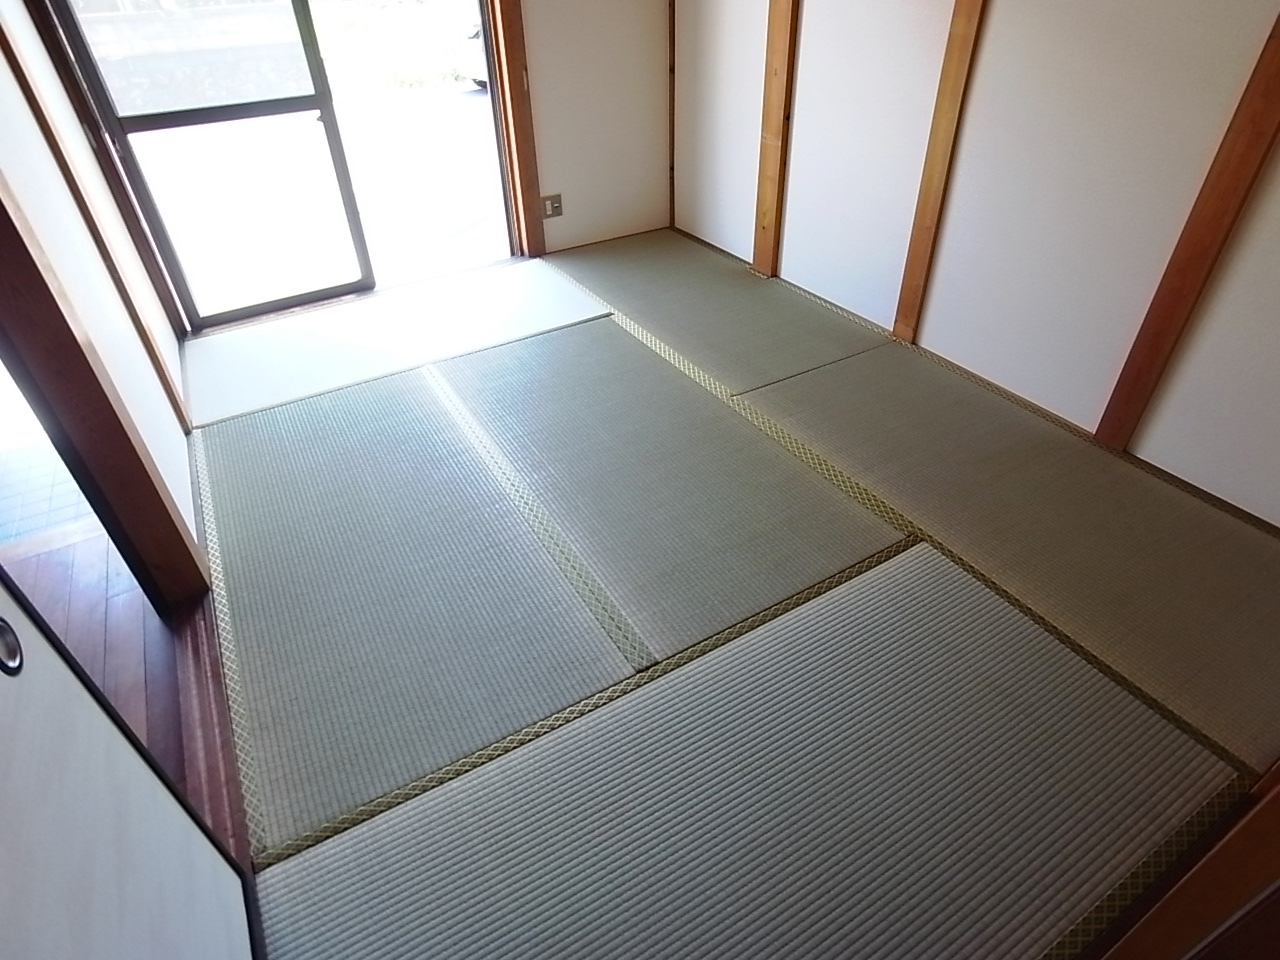 Living and room. It is the south side of the Japanese-style room ☆ 